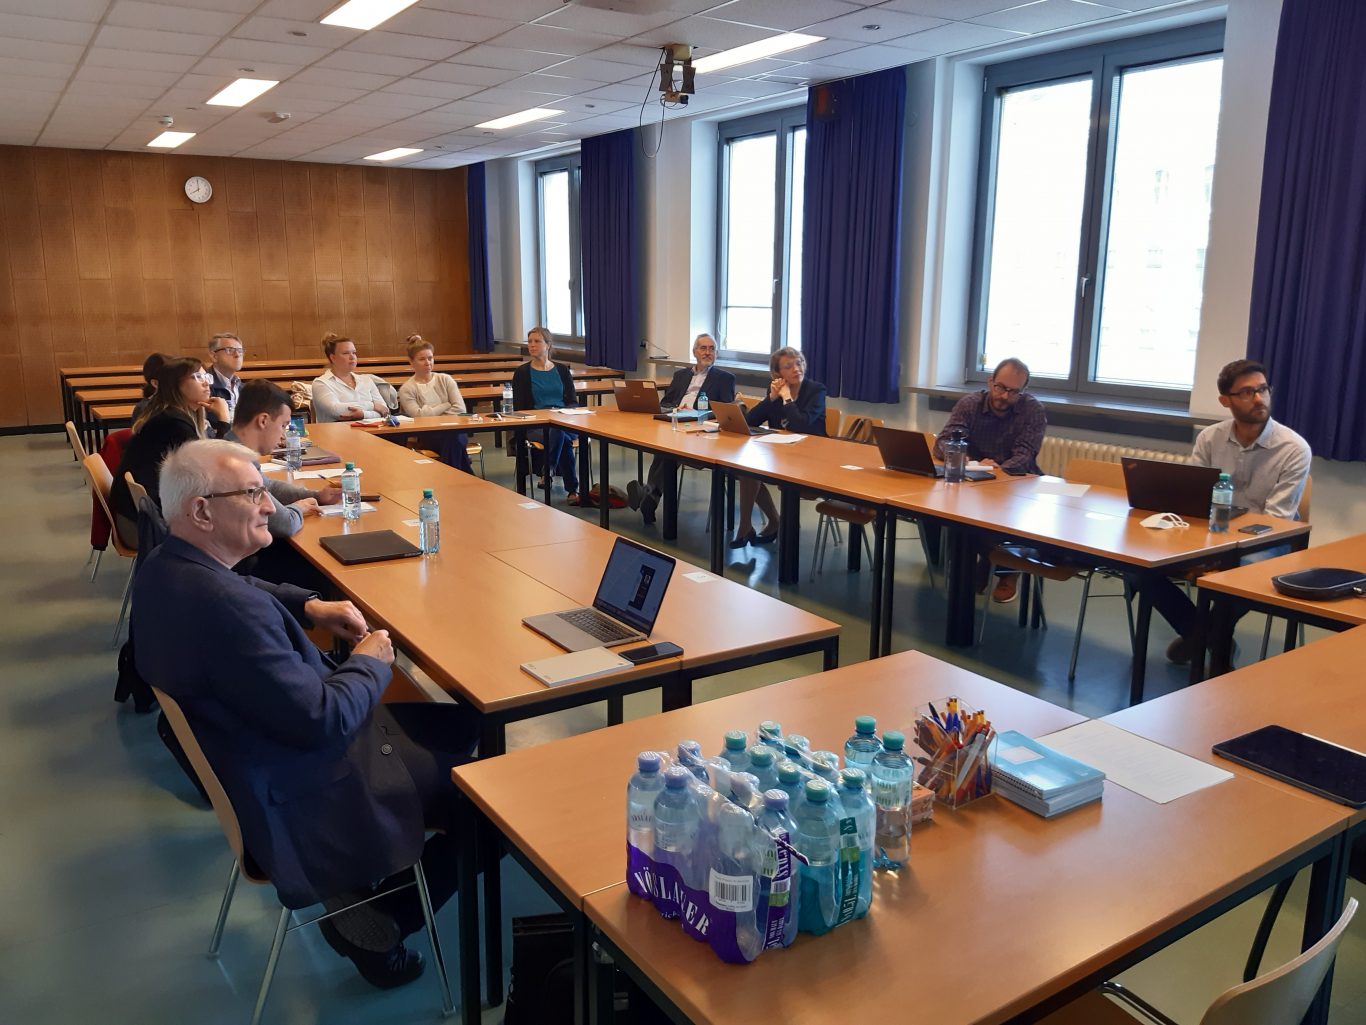 Second day of "The Global Economics and Geopolitics of Arctic Transport Infrastructures" workshop, September 24, 2021, University of Vienna. 